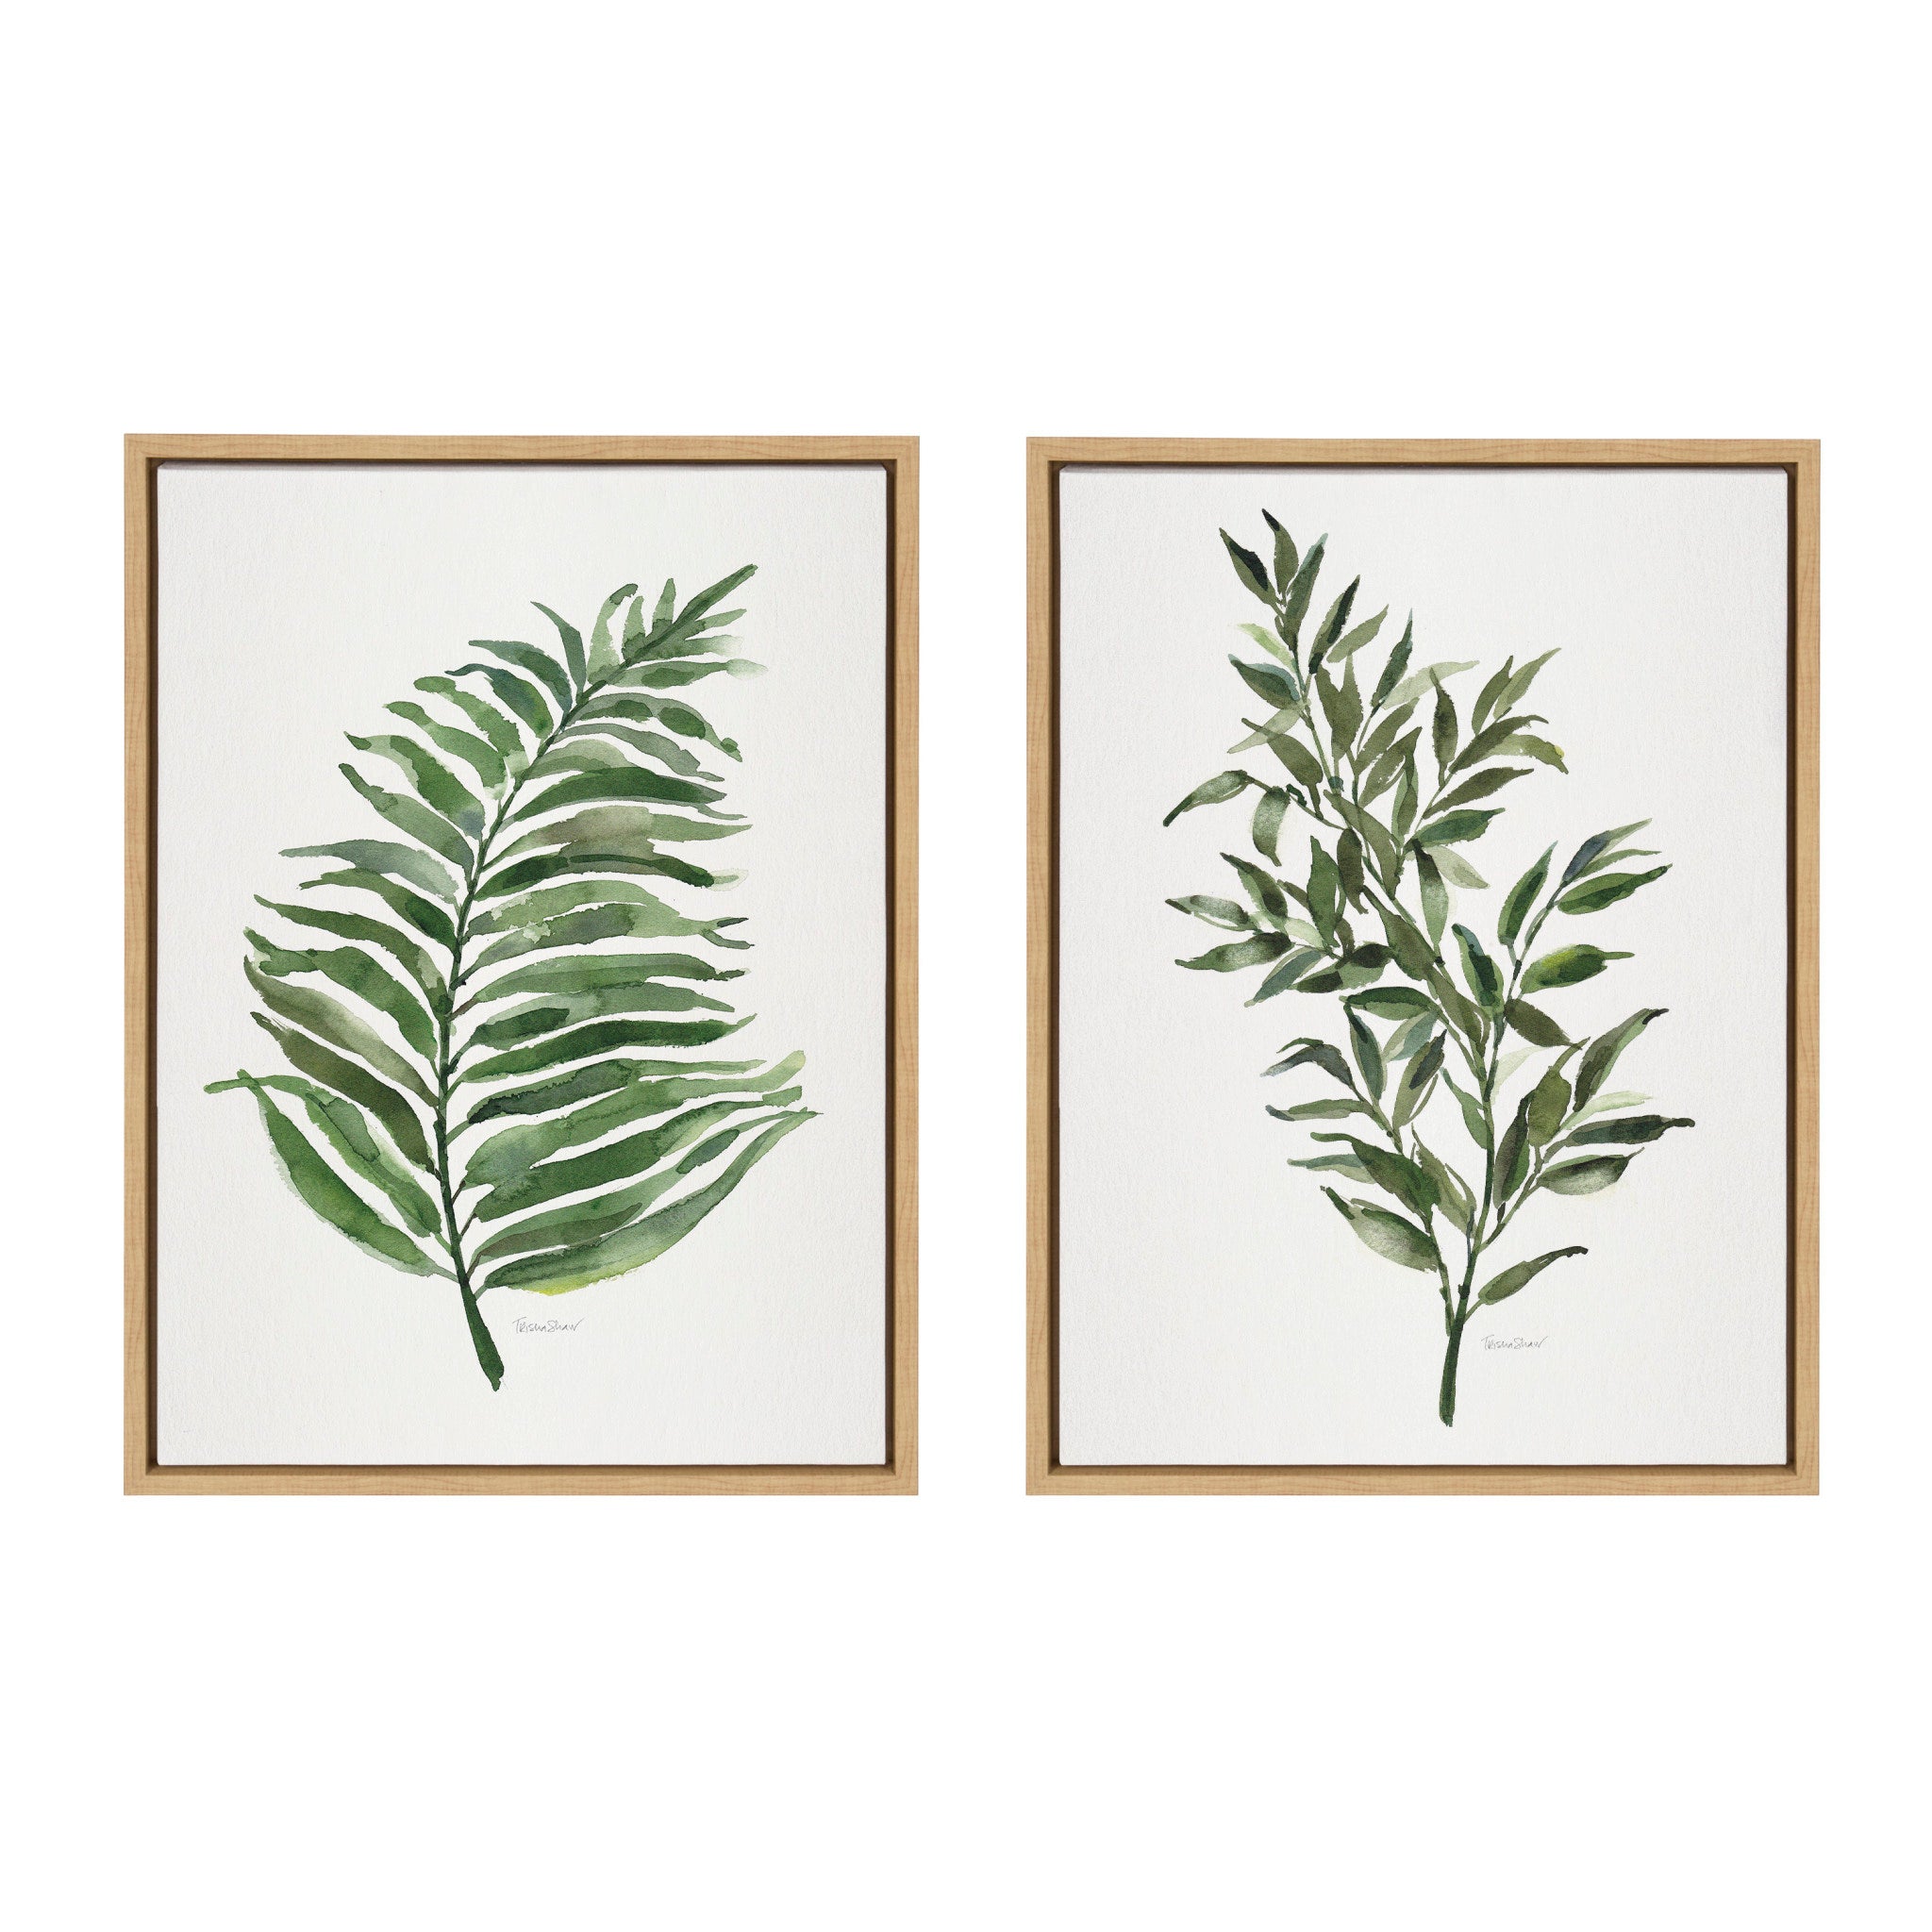 Sylvie Green Fern and Ruscus Framed Canvas Art Set by Patricia Shaw